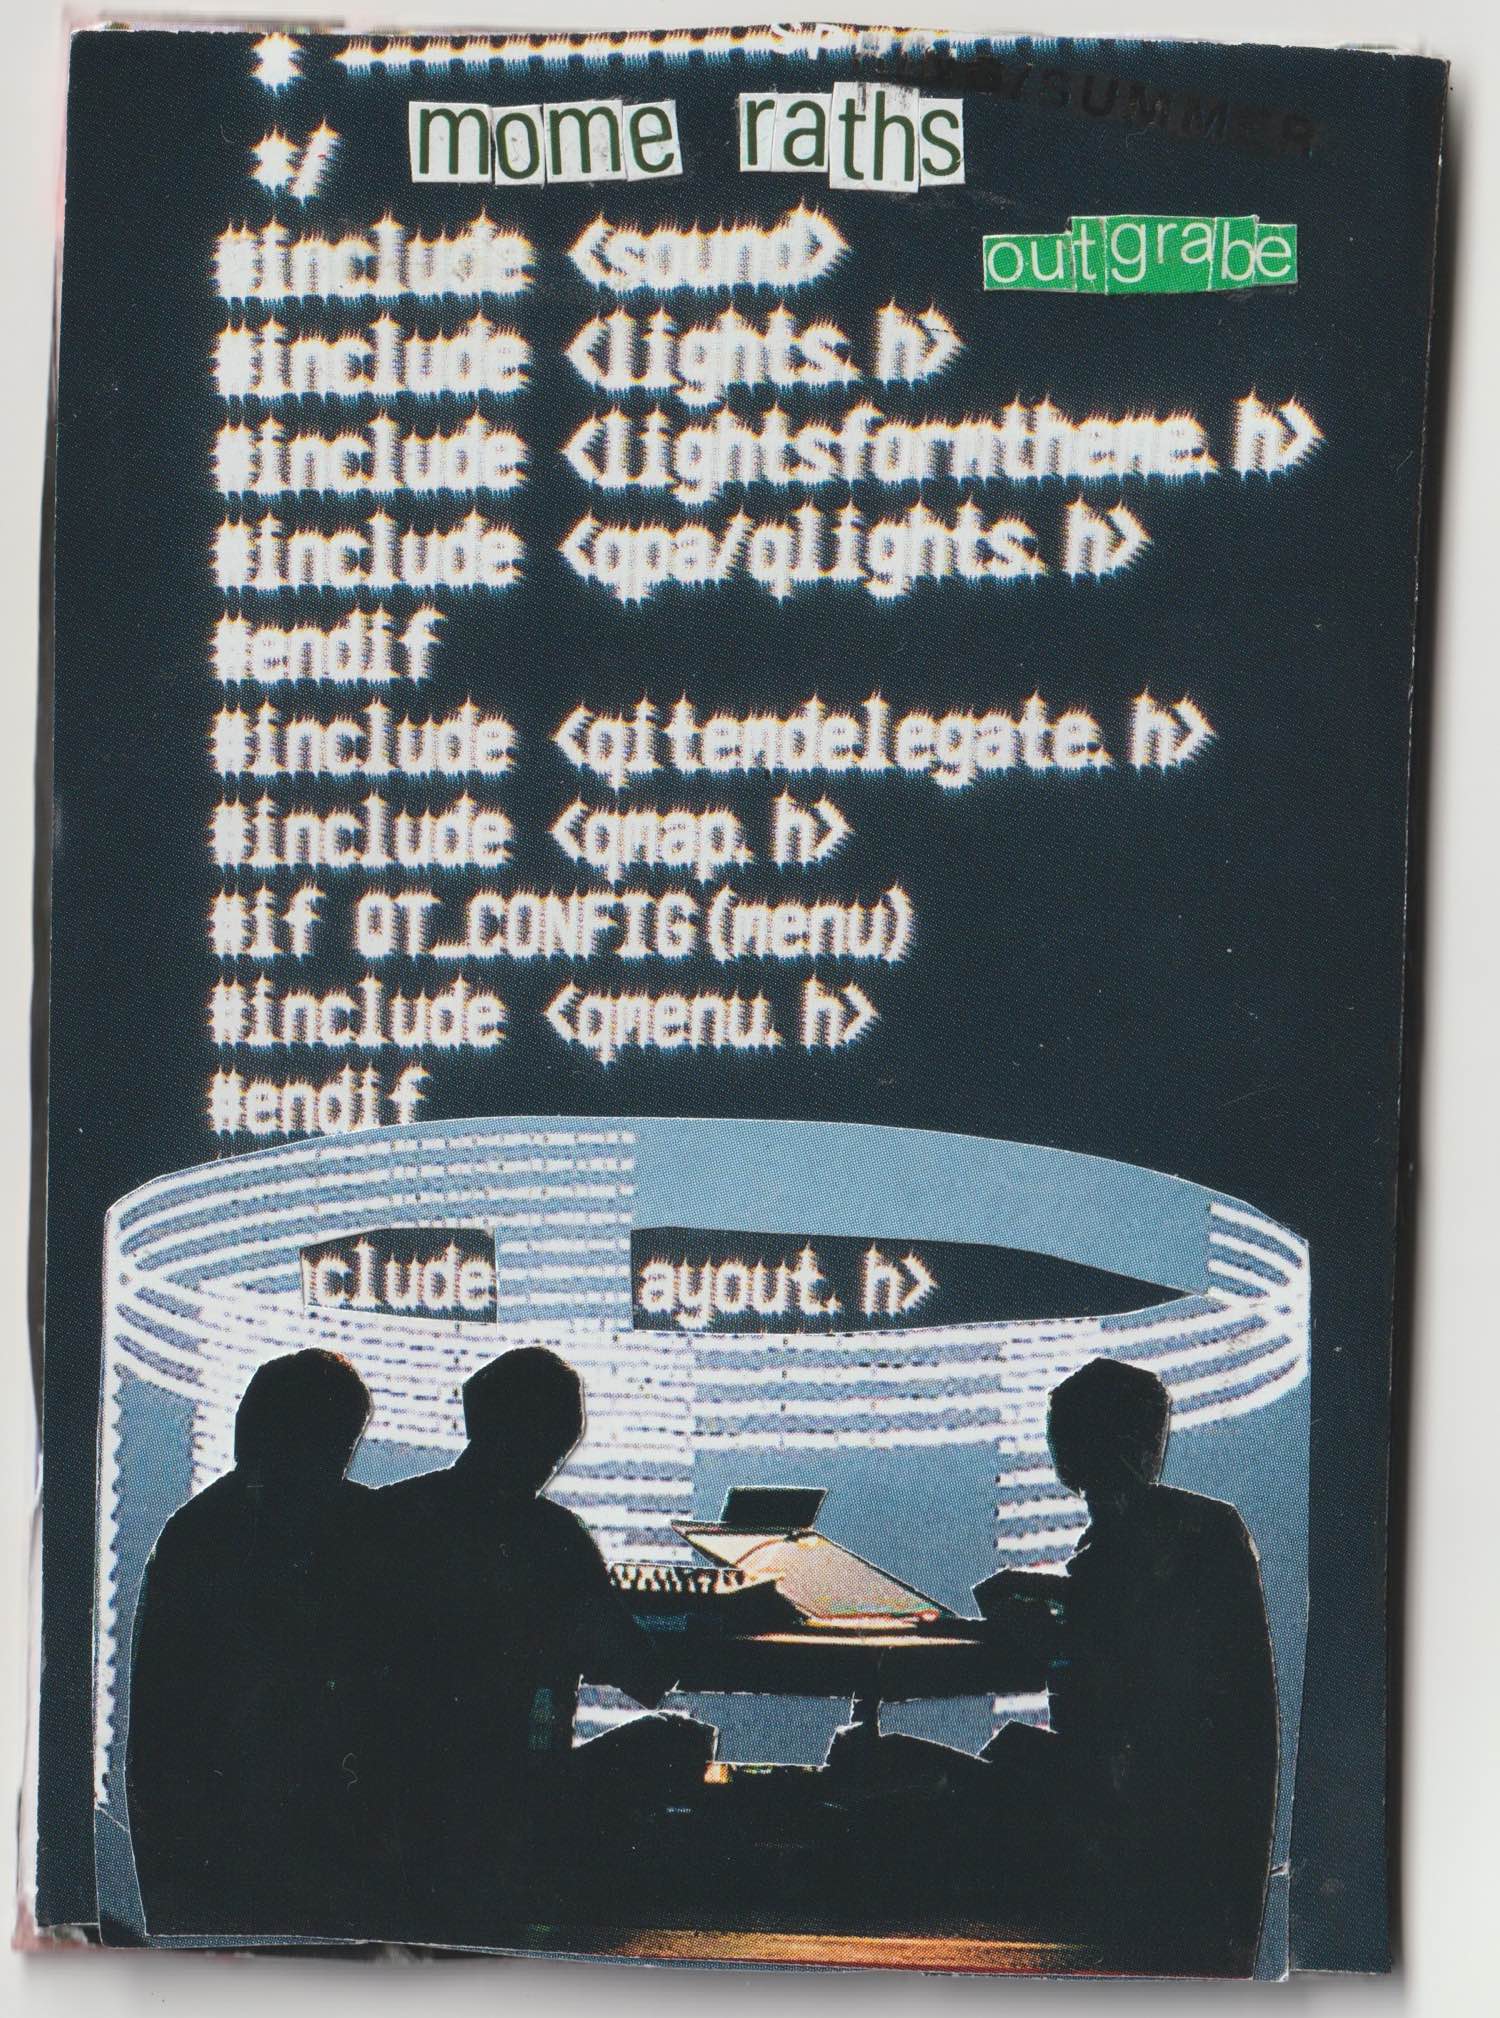 Back cover of zine showing cut-out words and images with overpainting